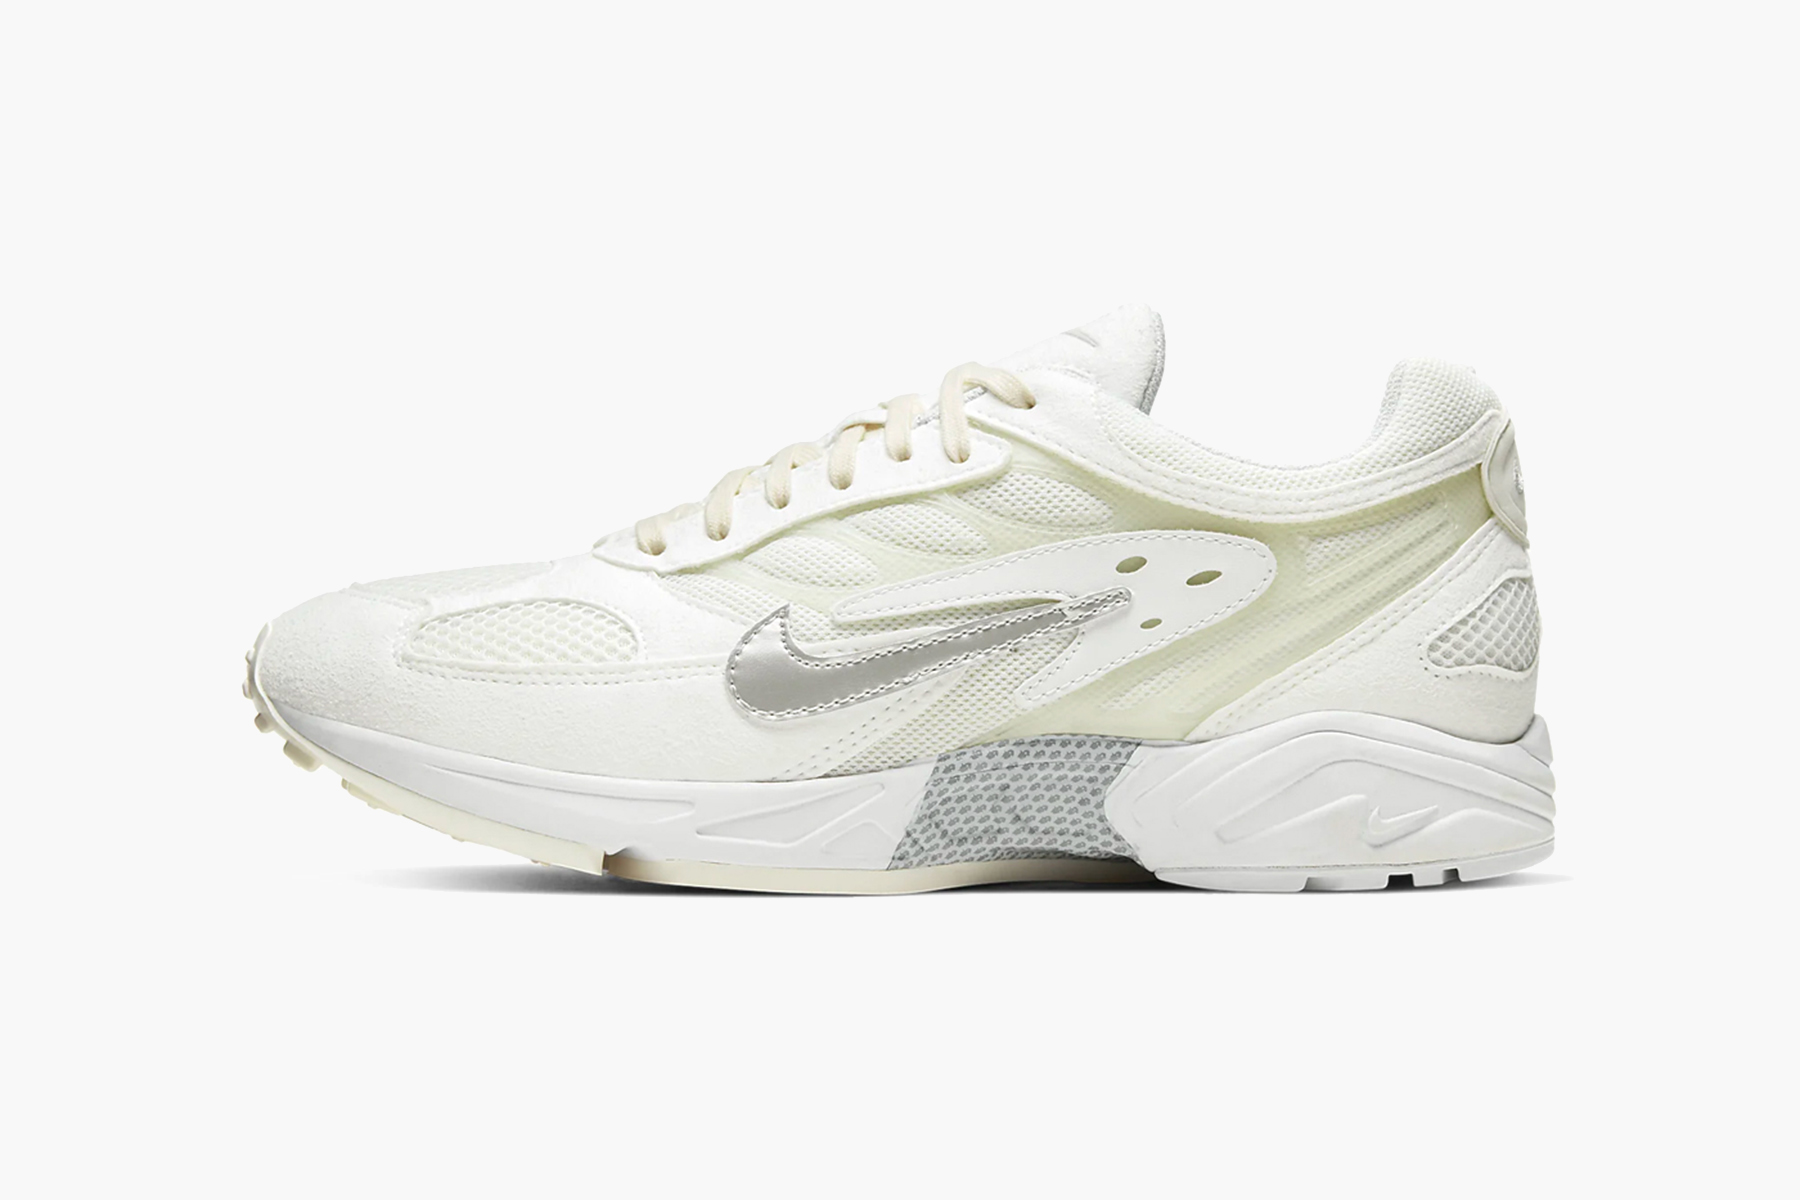 stamme bue Velkendt Nike Air Ghost Racer "White/Pure Platinum" Release | Hypebeast